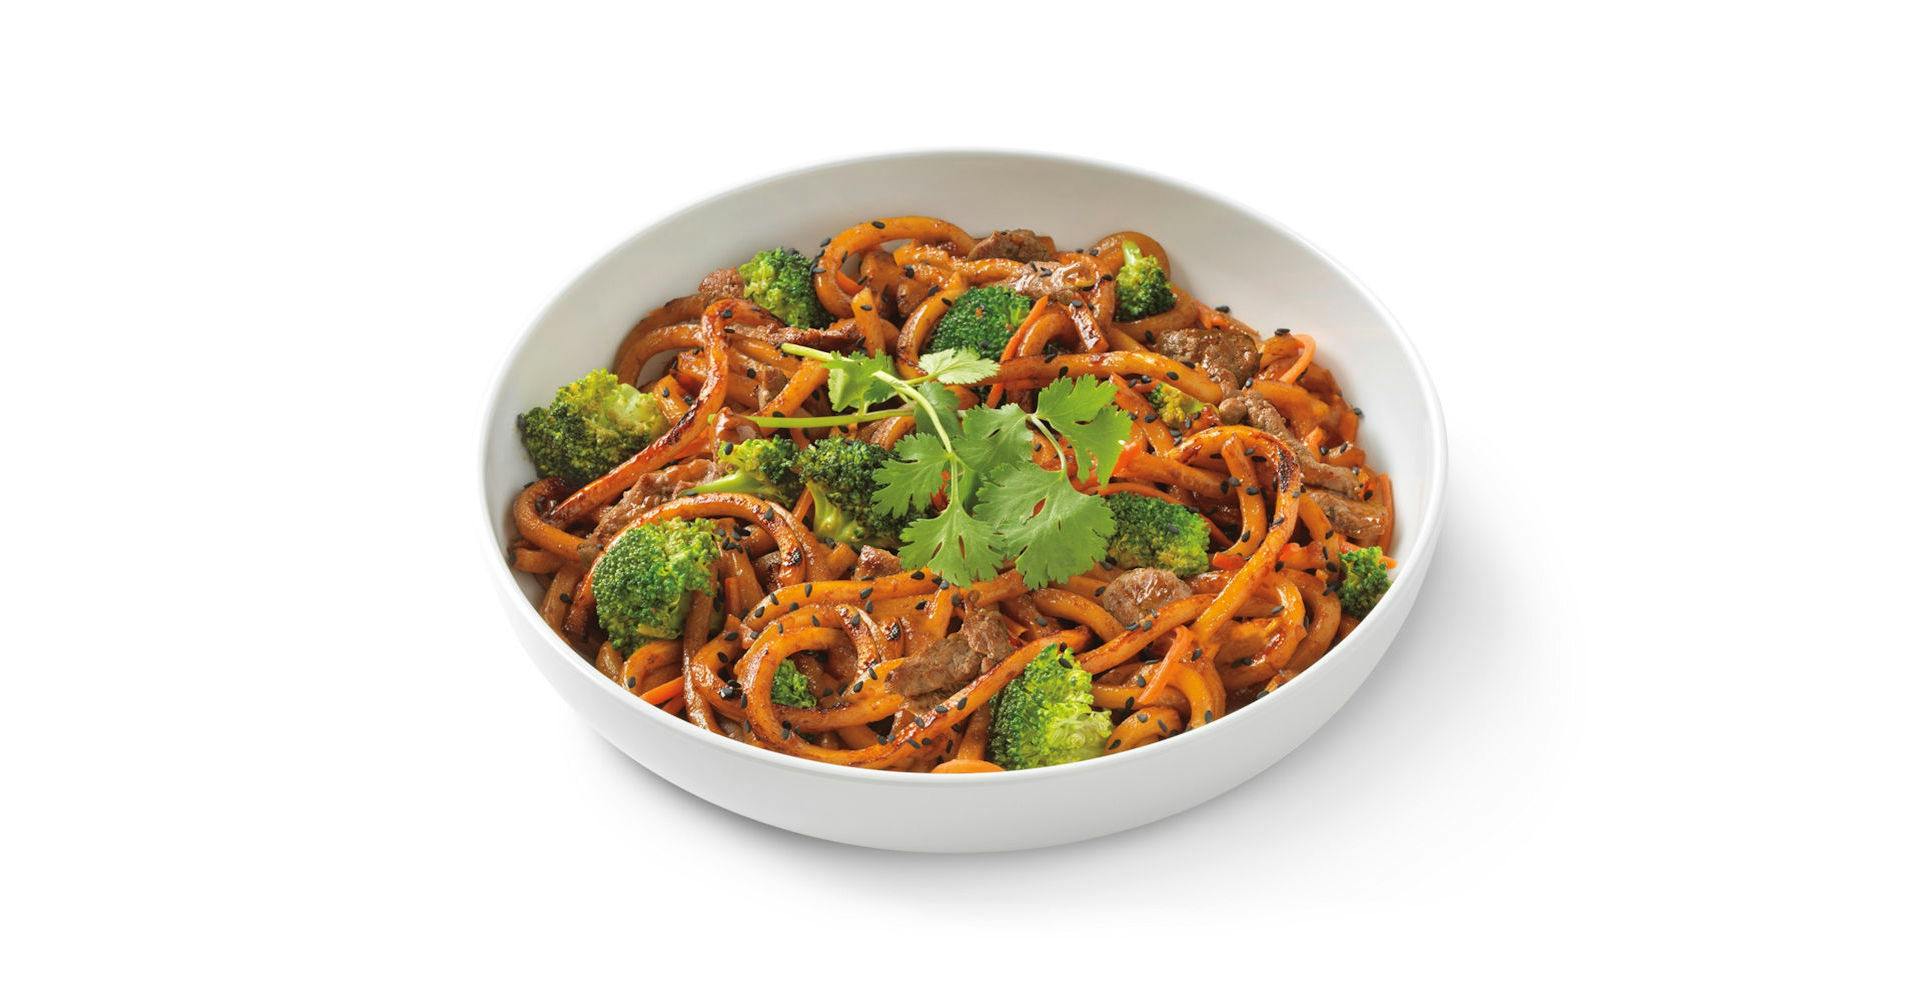 Japanese Pan Noodles with Marinated Steak from Noodles & Company - Monona in Monona, WI